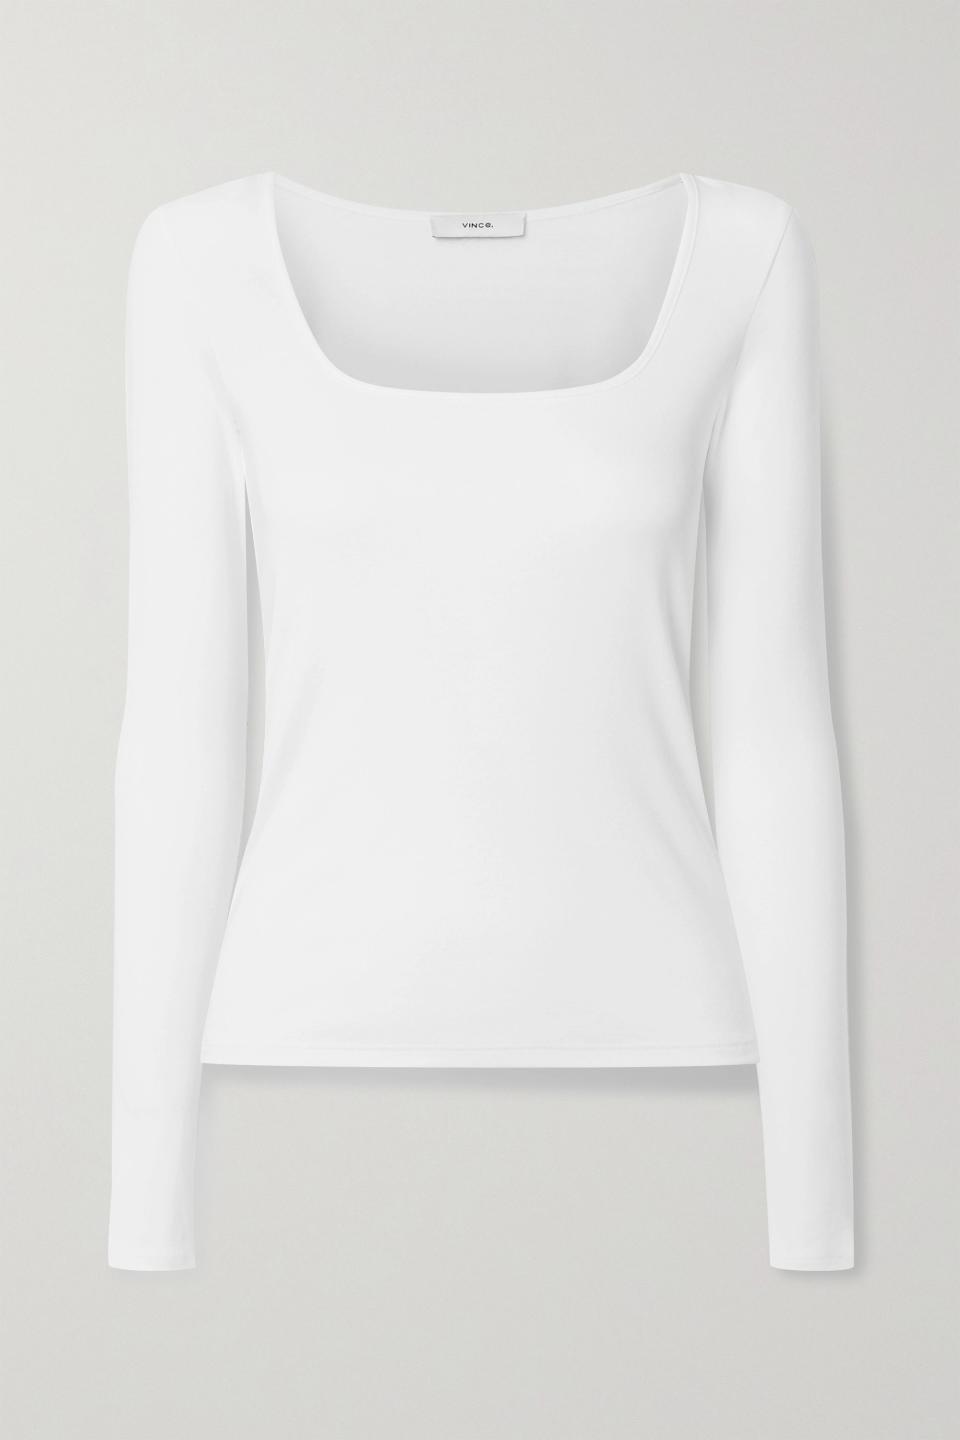 19) Pima Cotton and Modal-Blend Jersey Top